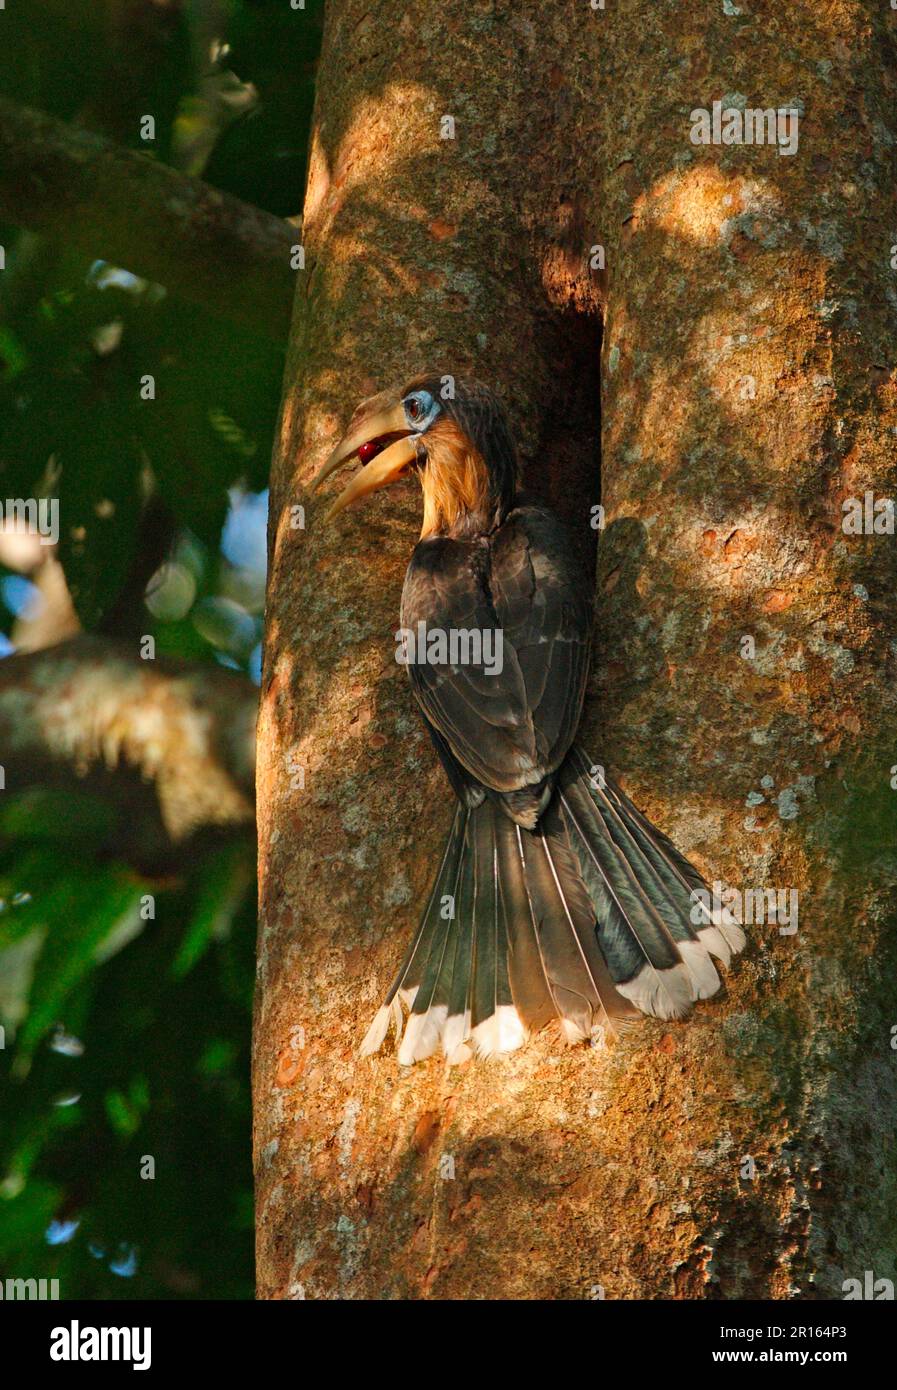 Tickell's Brown Hornbill (Anorrhinus tickelli), adult male, vomiting fruit, visiting nest hole in tree trunk, Kaeng Krachan N. P. Thailand Stock Photo